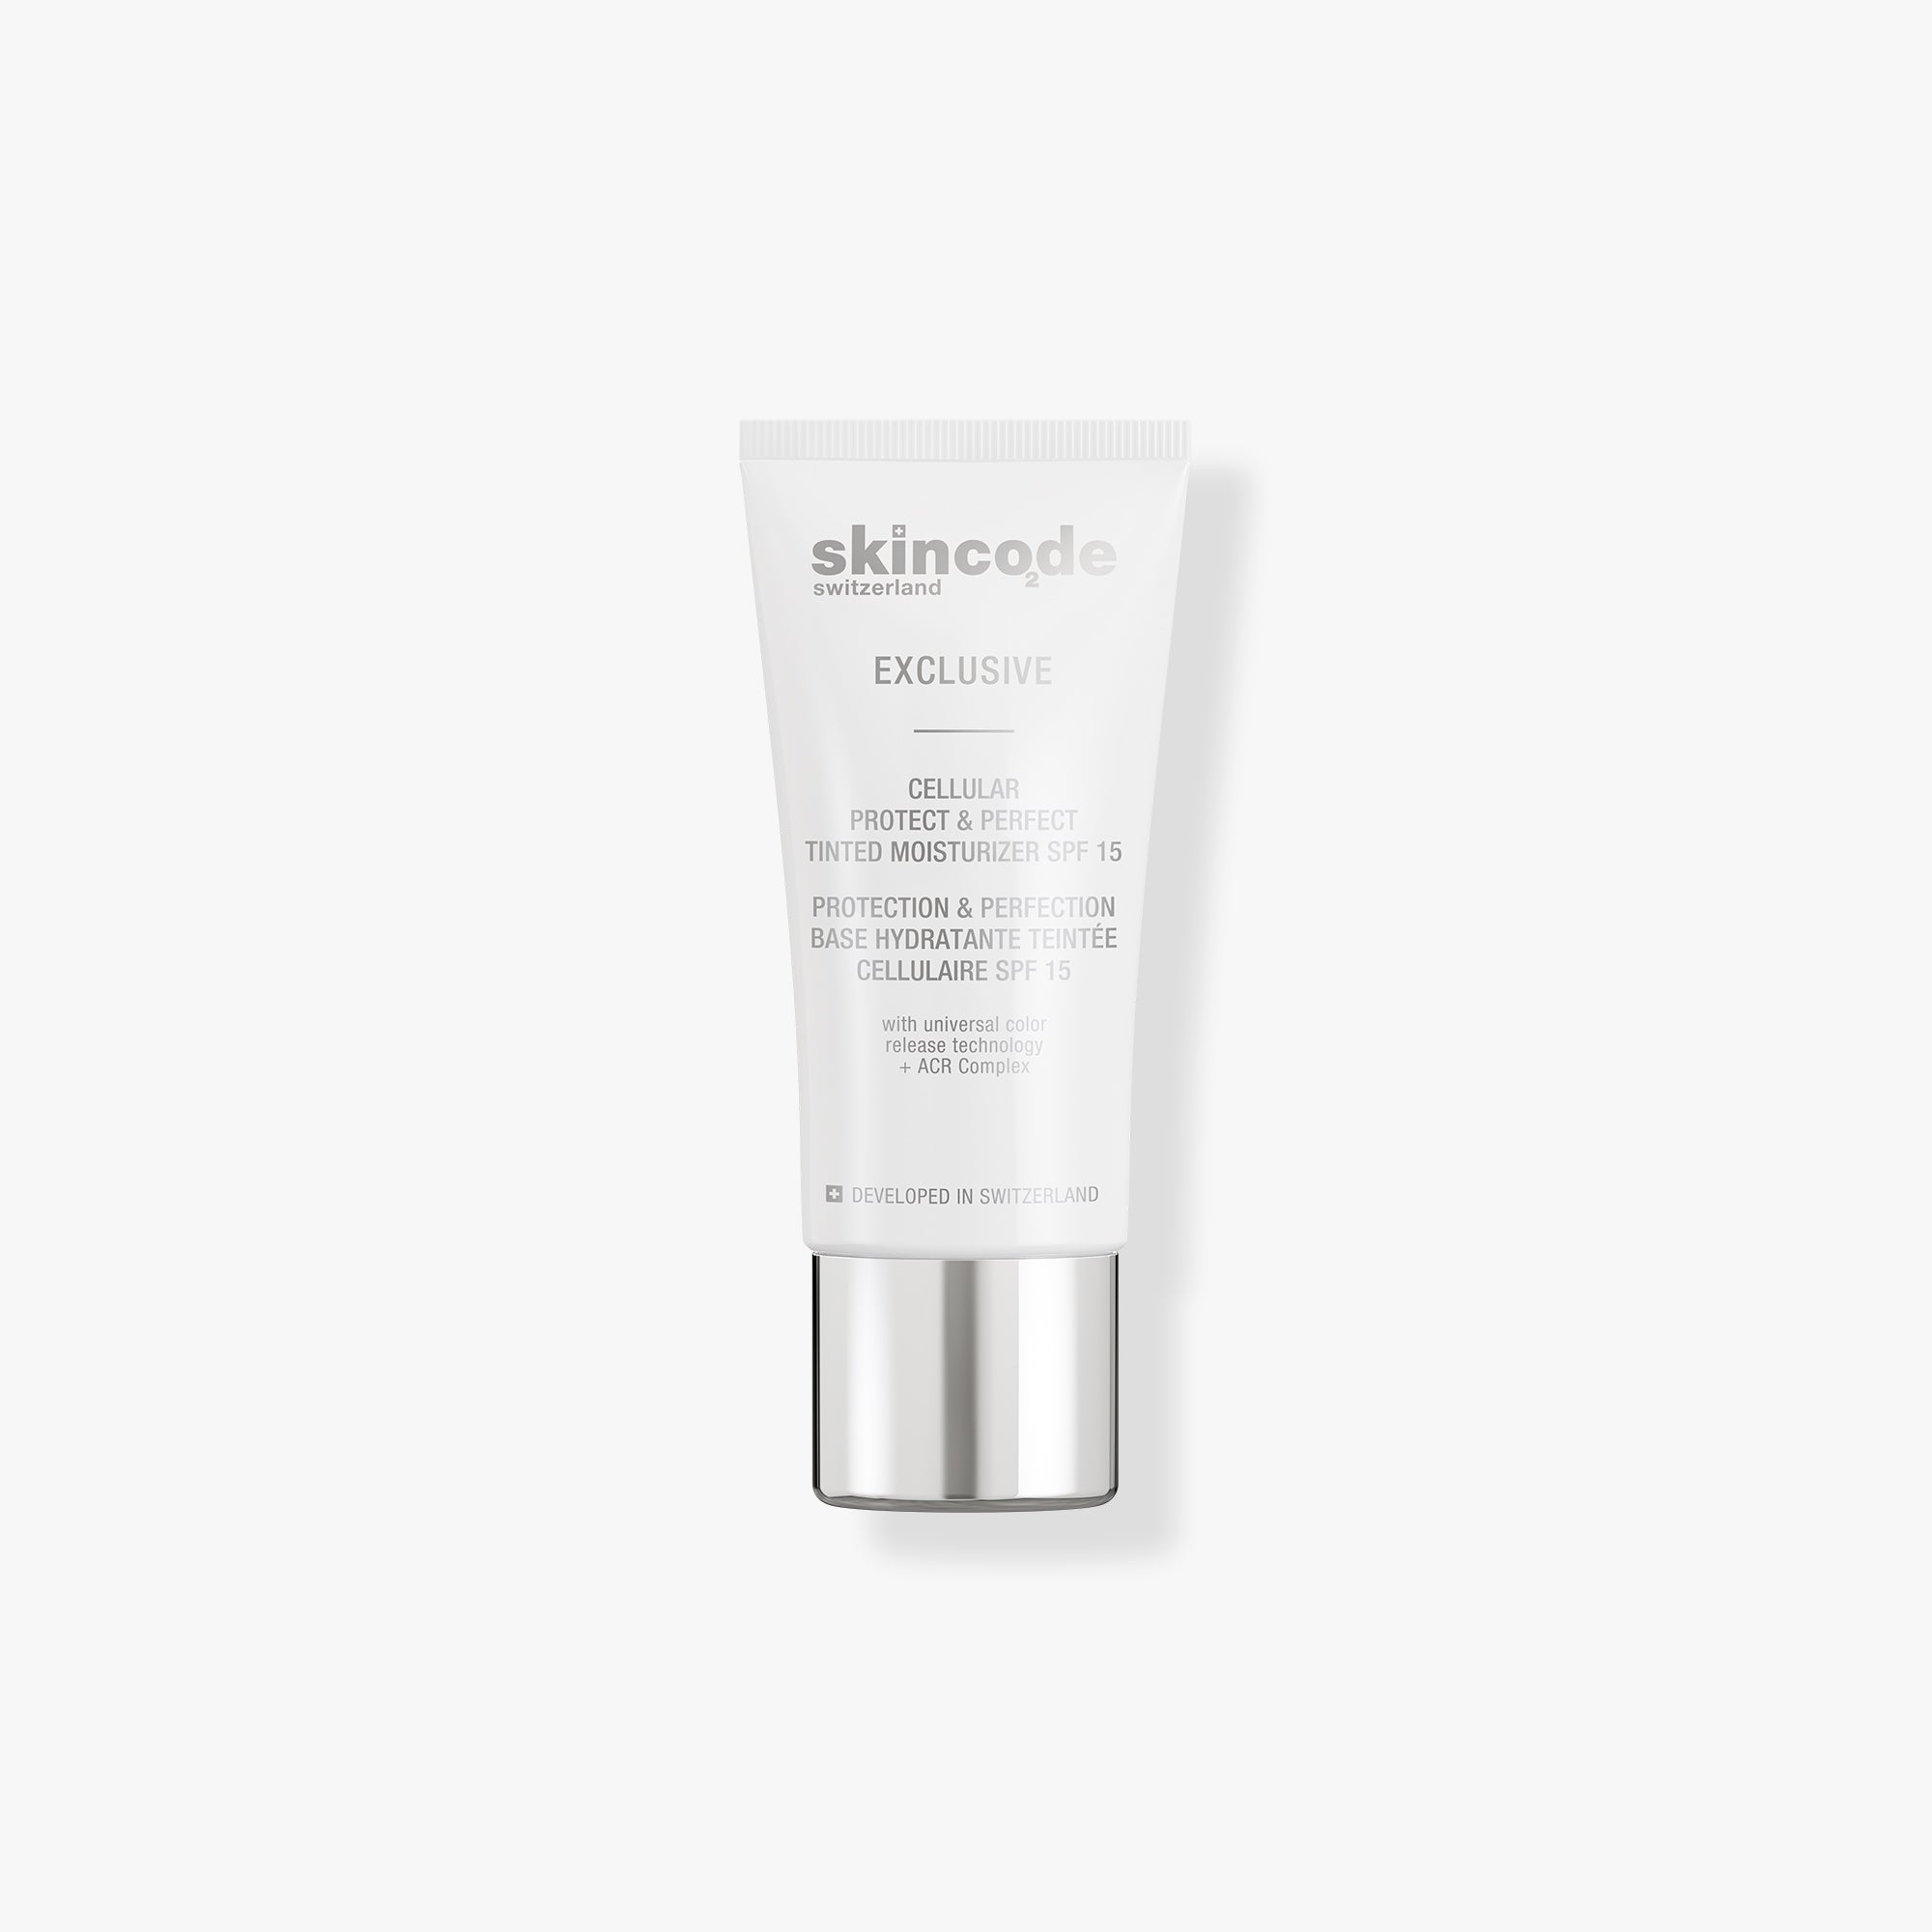 SkinCode Exclusive, Cellular Protect & Perfect Tinted Moisturizer SPF 15